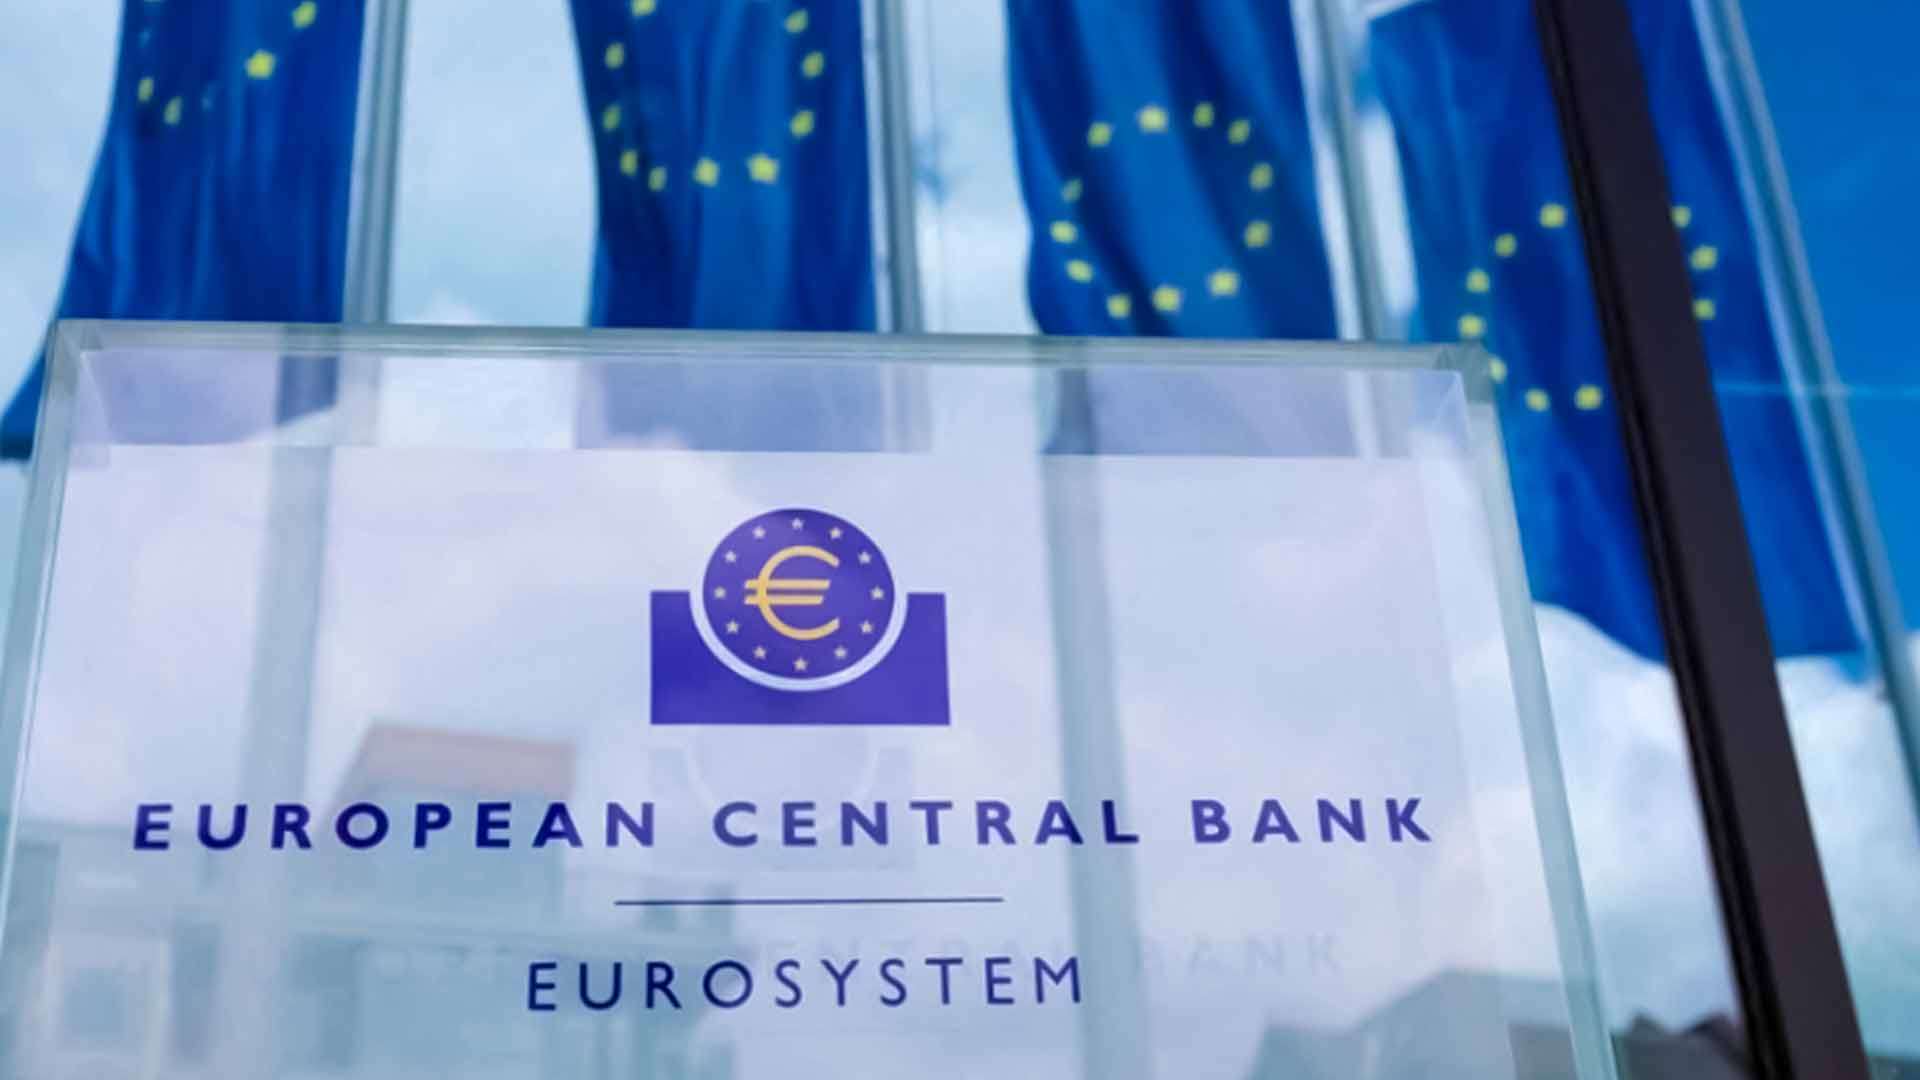 Despite banking turmoil, the ECB continues to hike rates